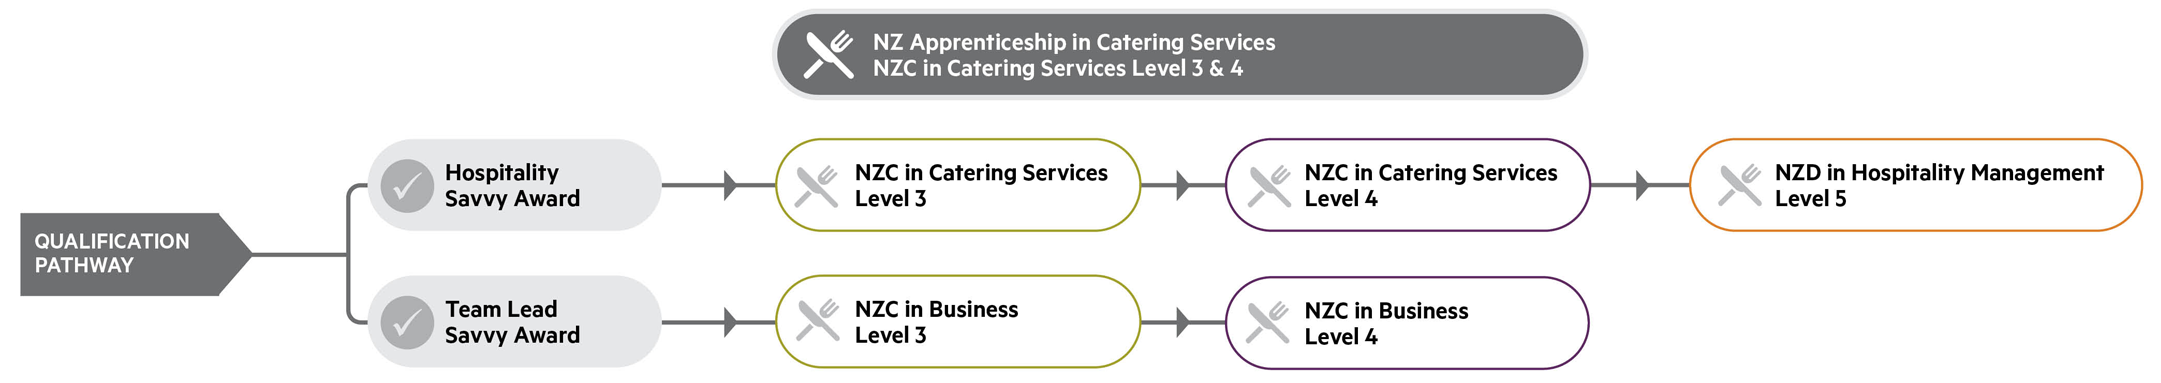 catering Qual pathway